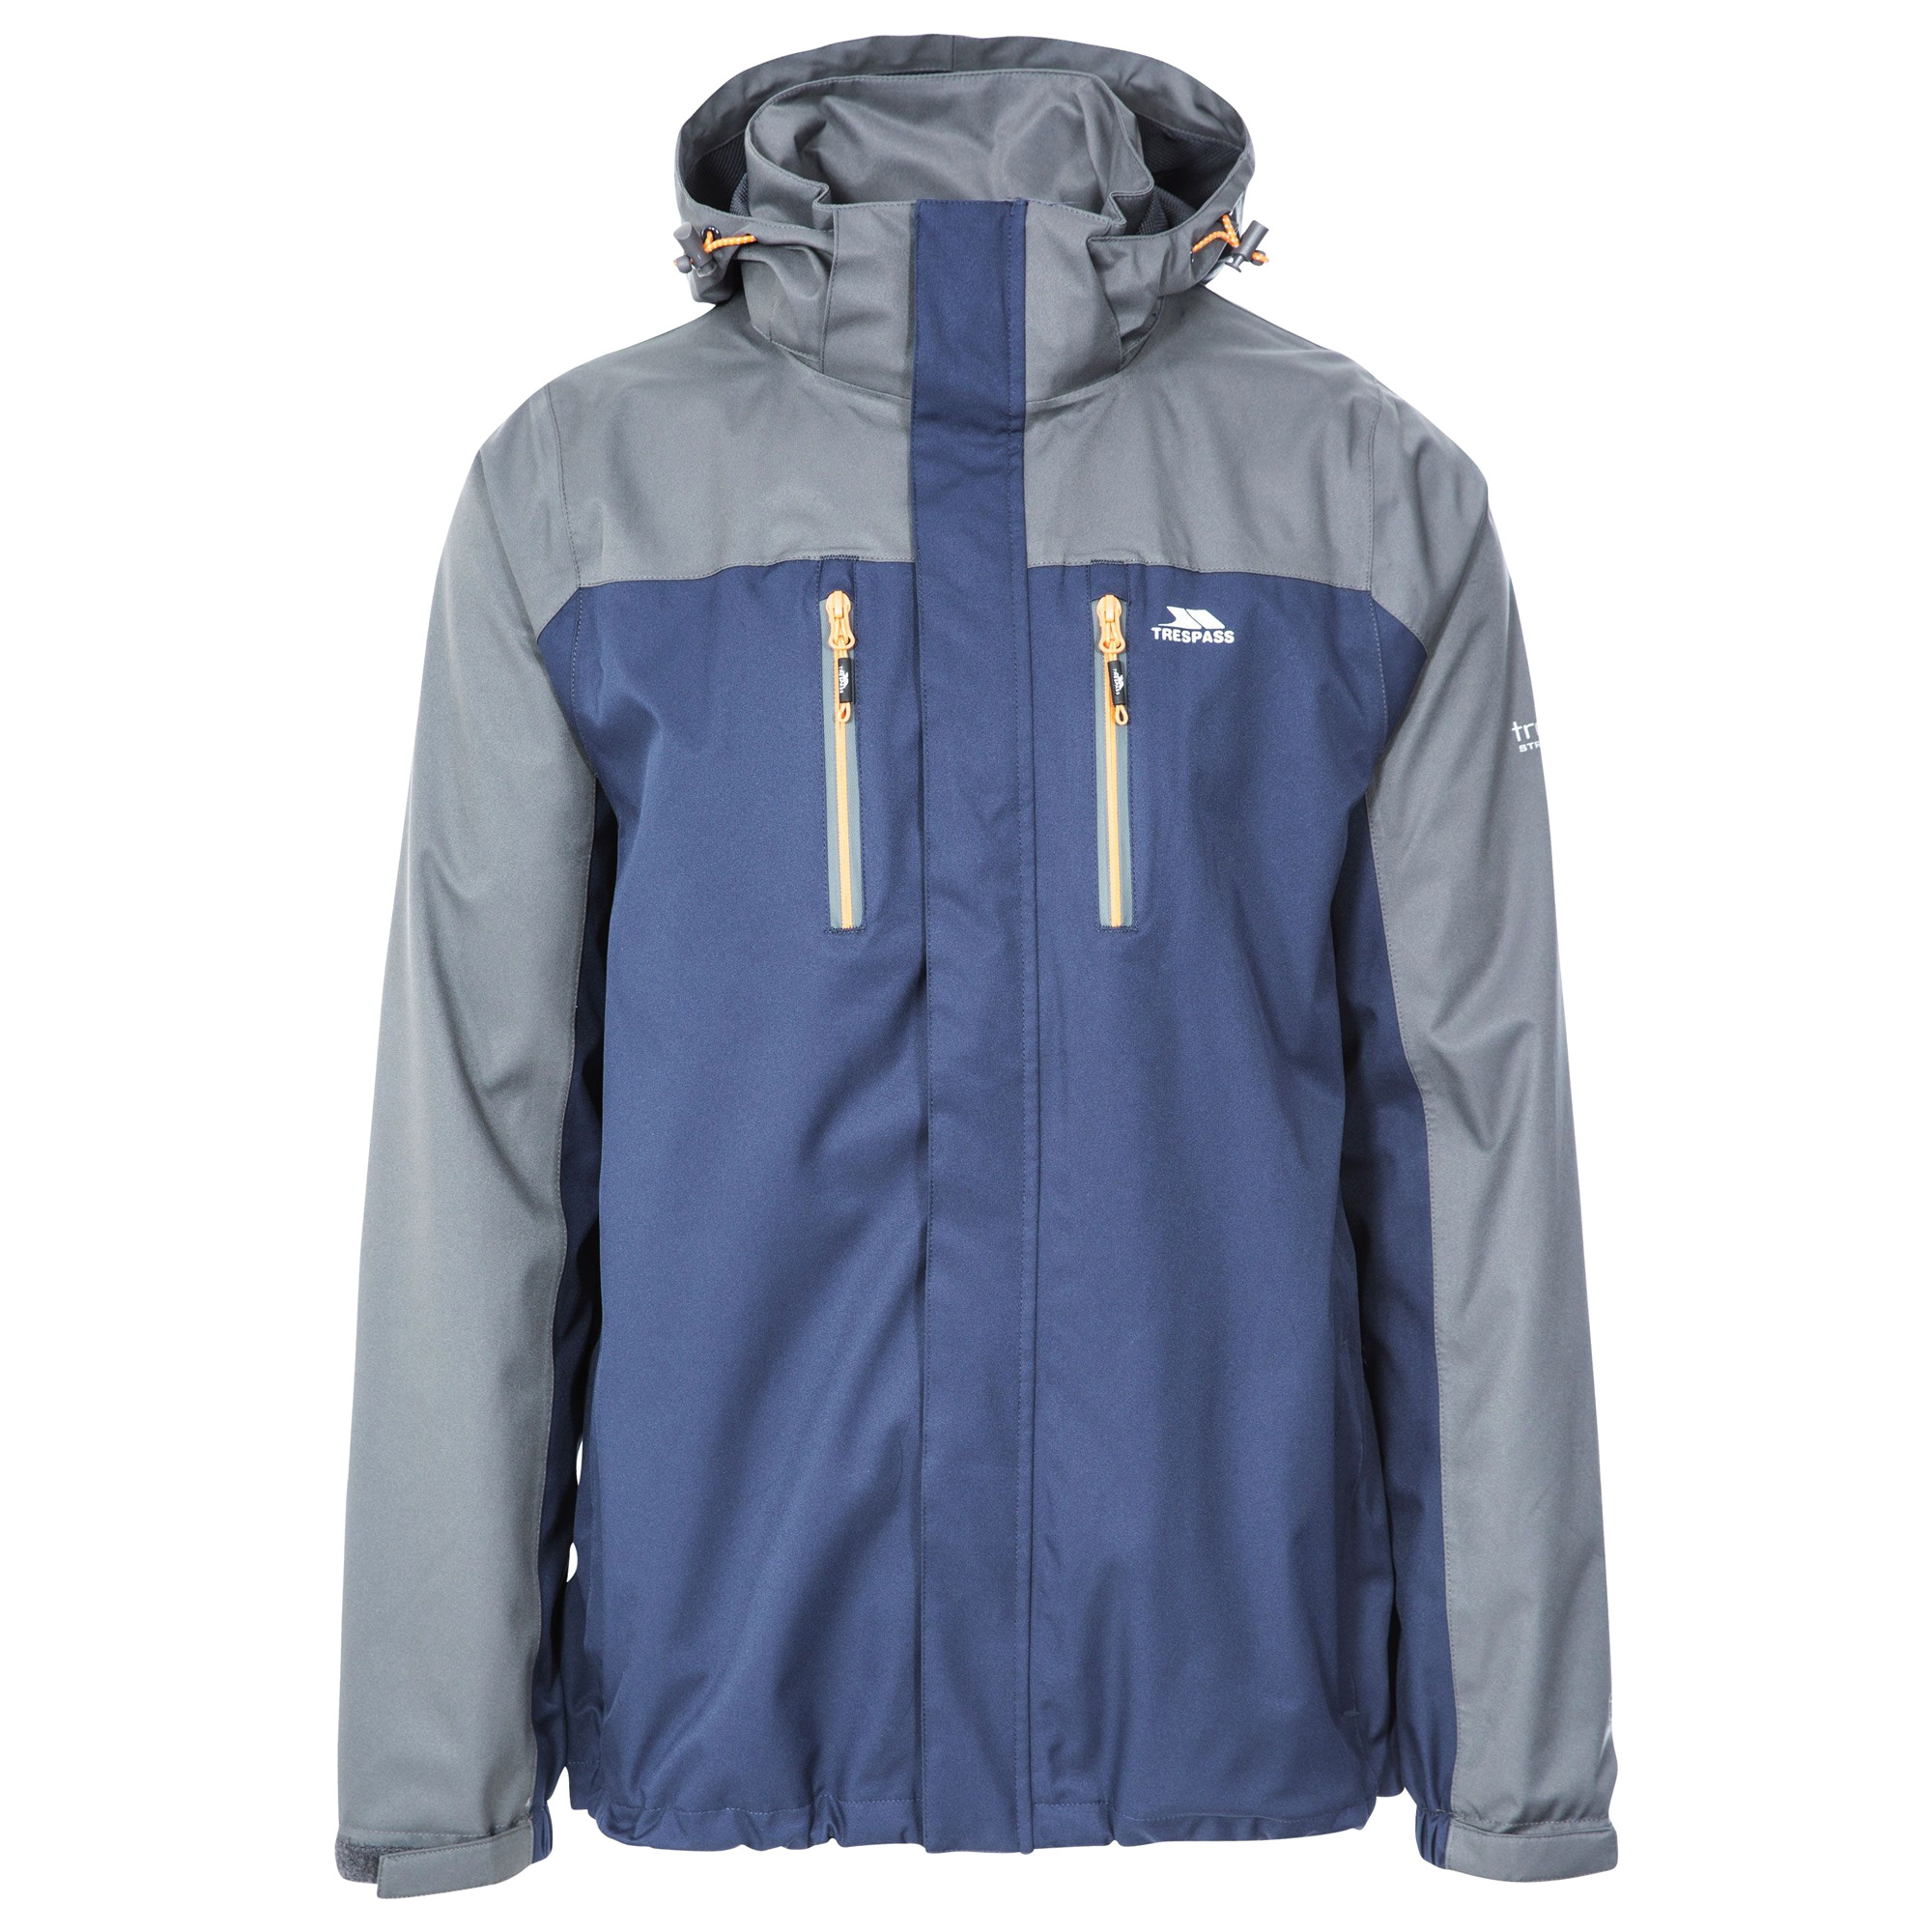 Chaqueta Impermeable Wooster Trespass